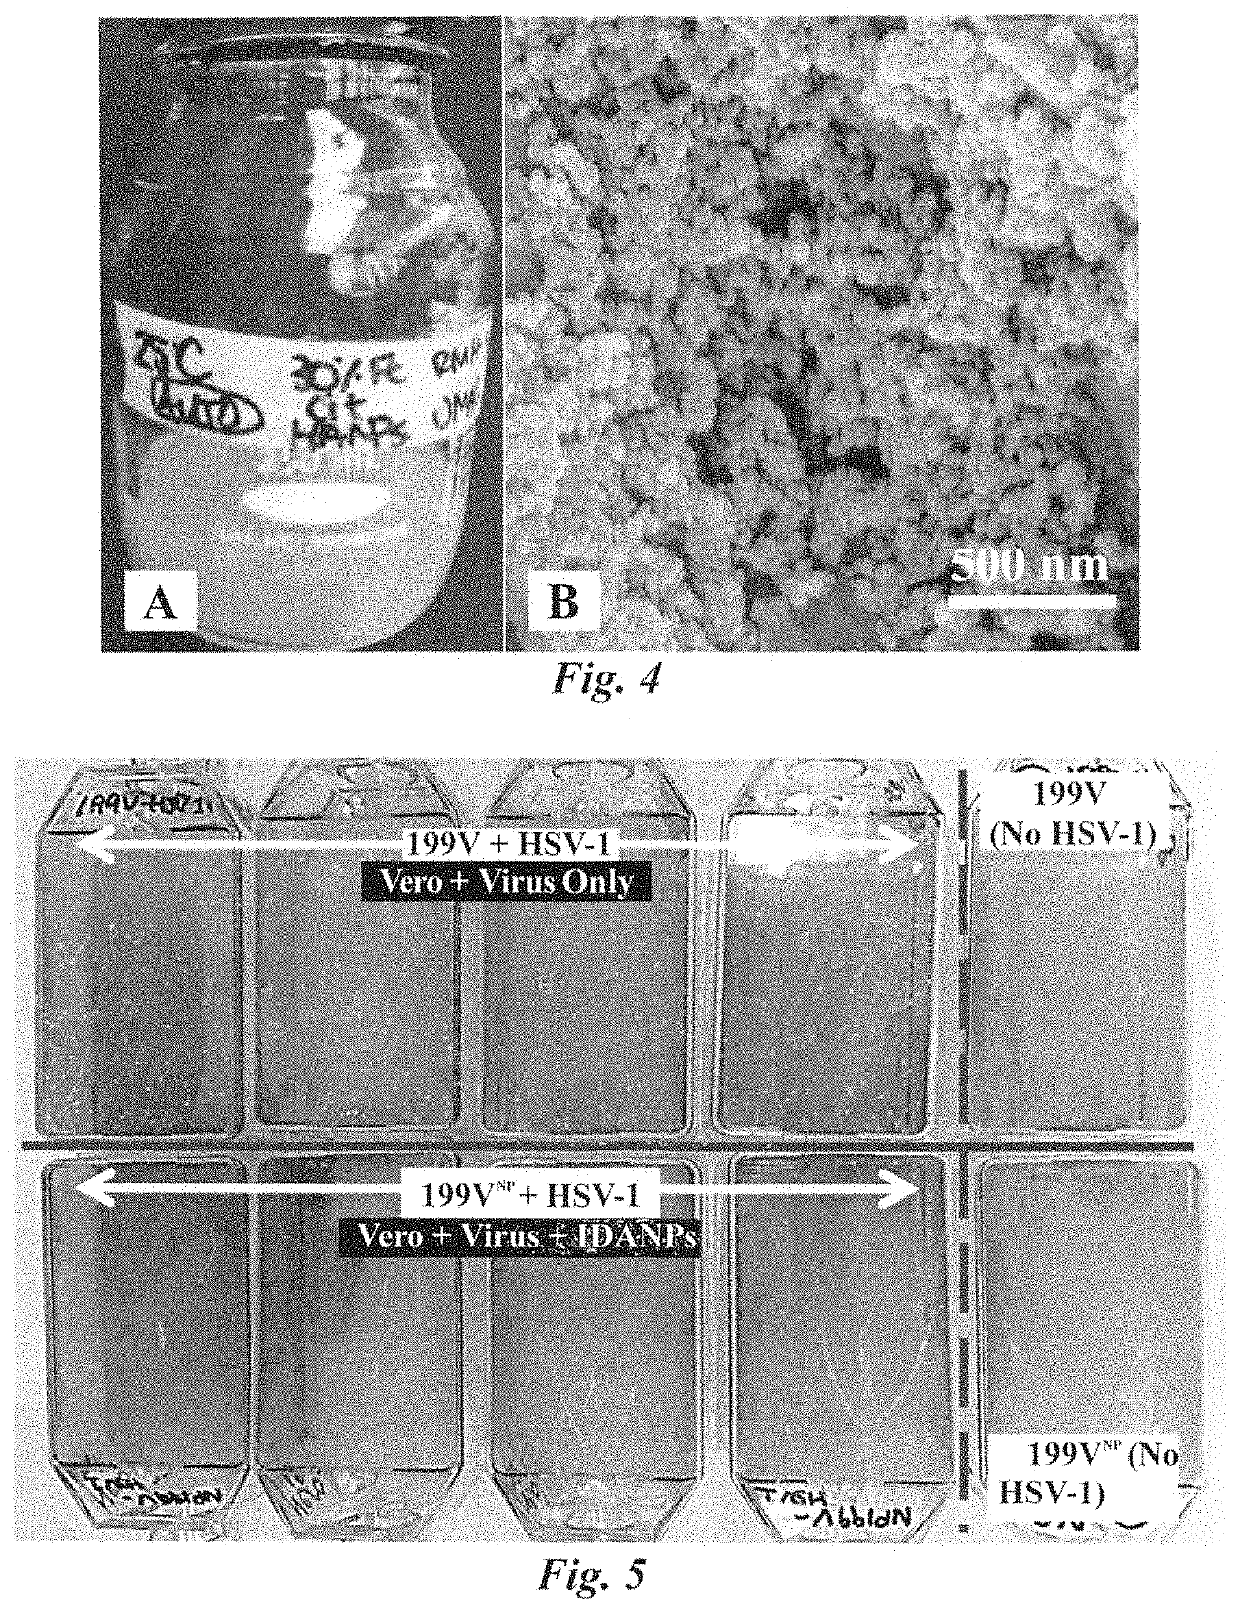 Antiviral composition and applications of iron-doped apatite nanoparticles